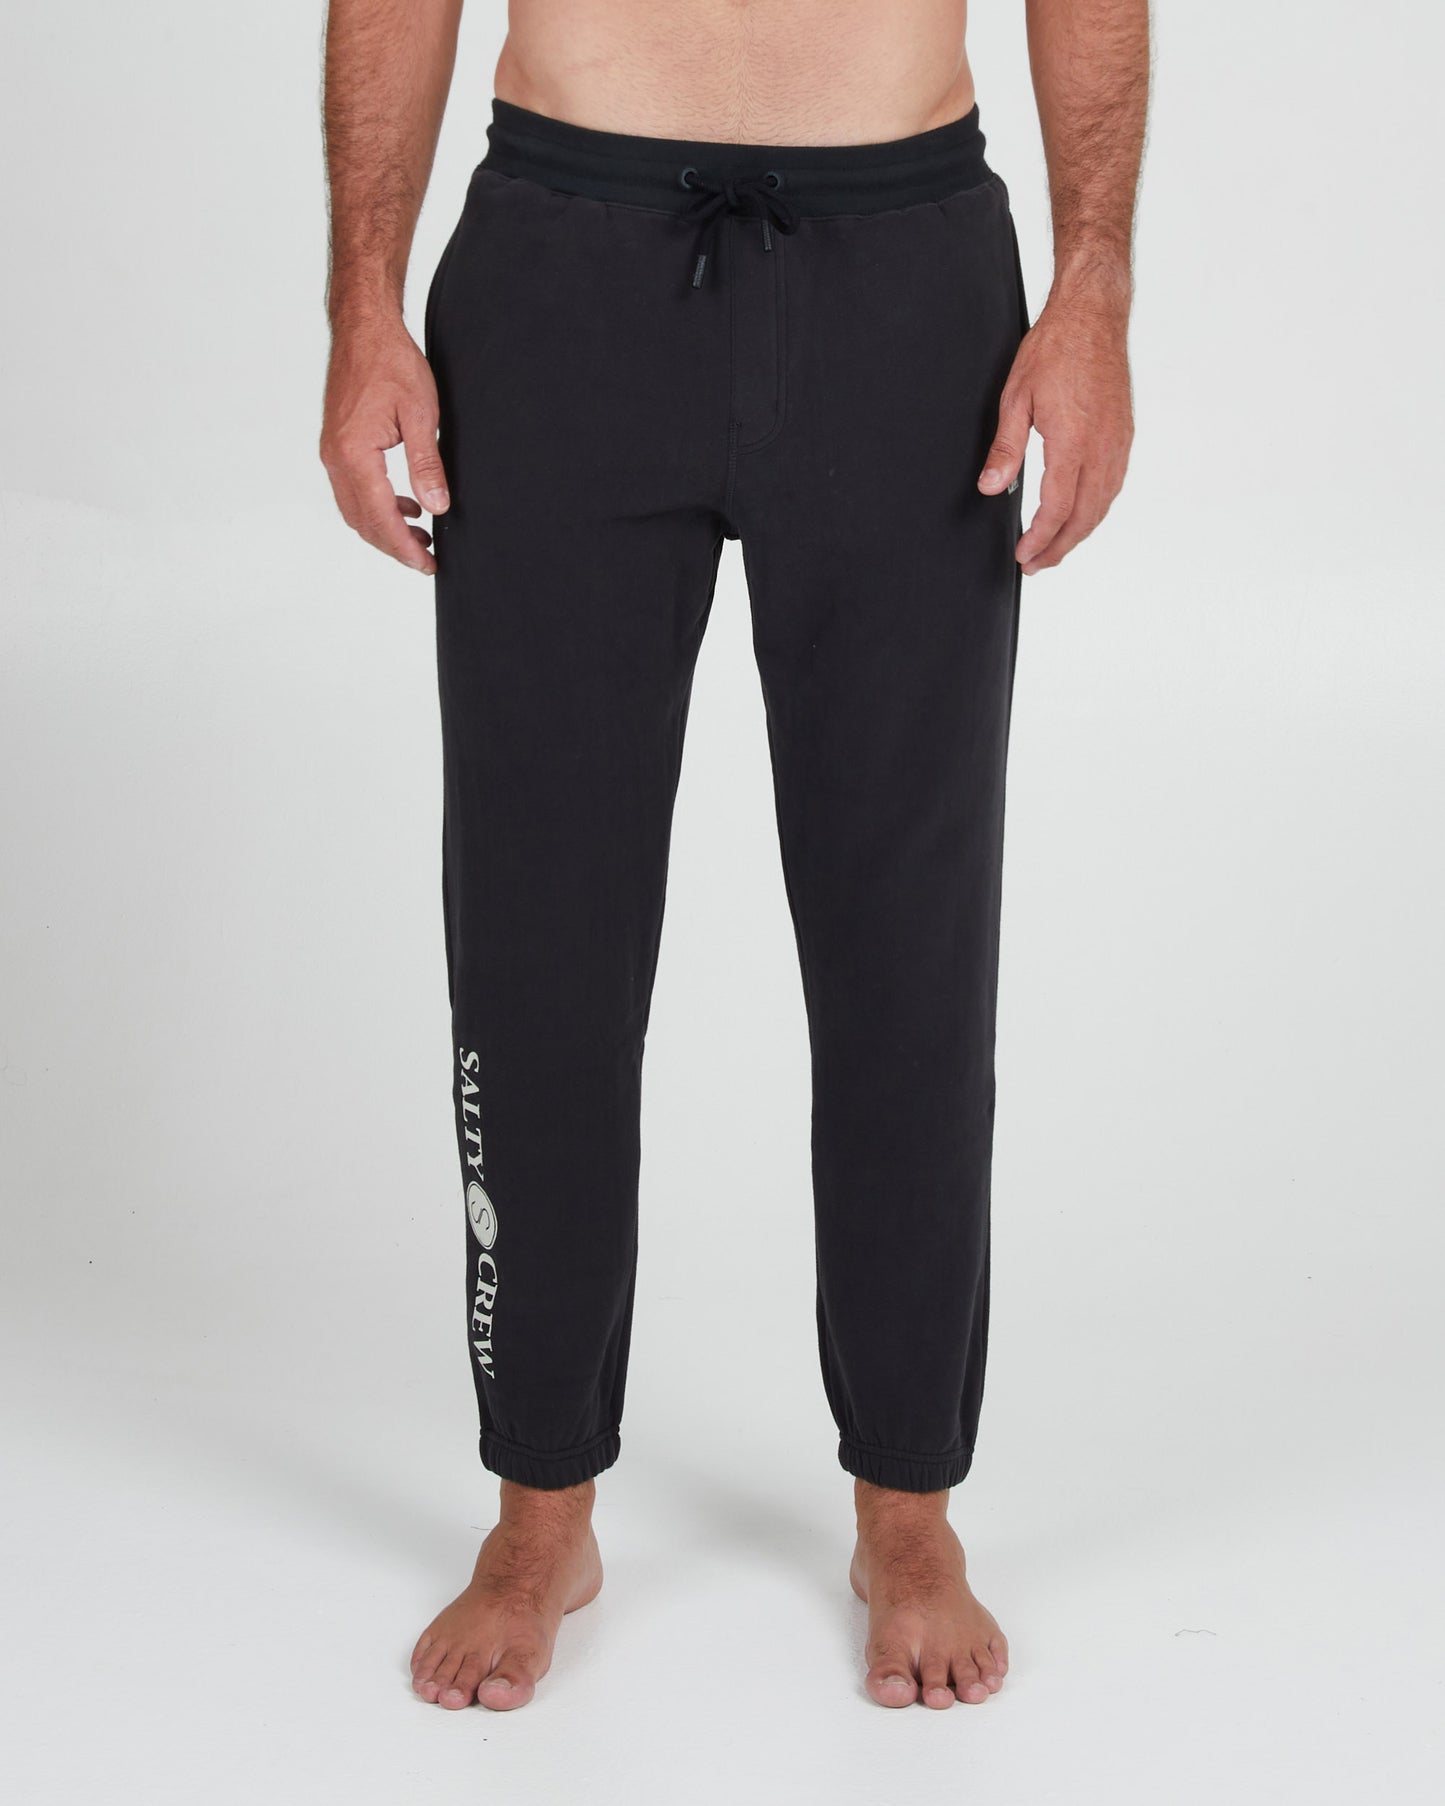 On body front of the Dockside Black Sweatpant